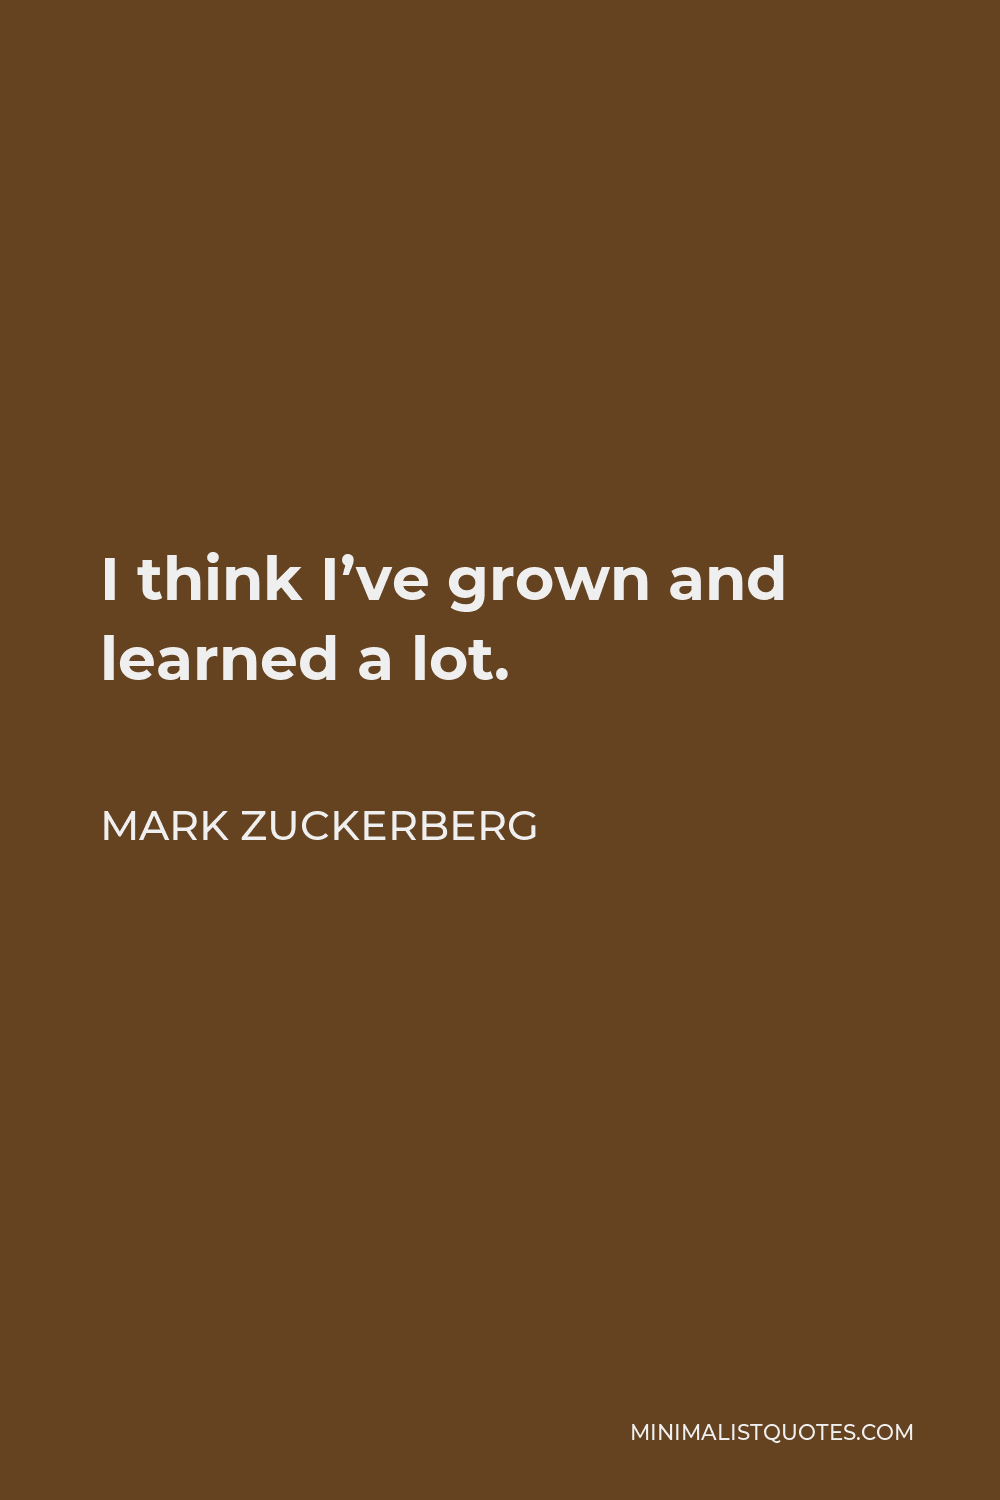 Mark Zuckerberg Quote - I think I’ve grown and learned a lot.